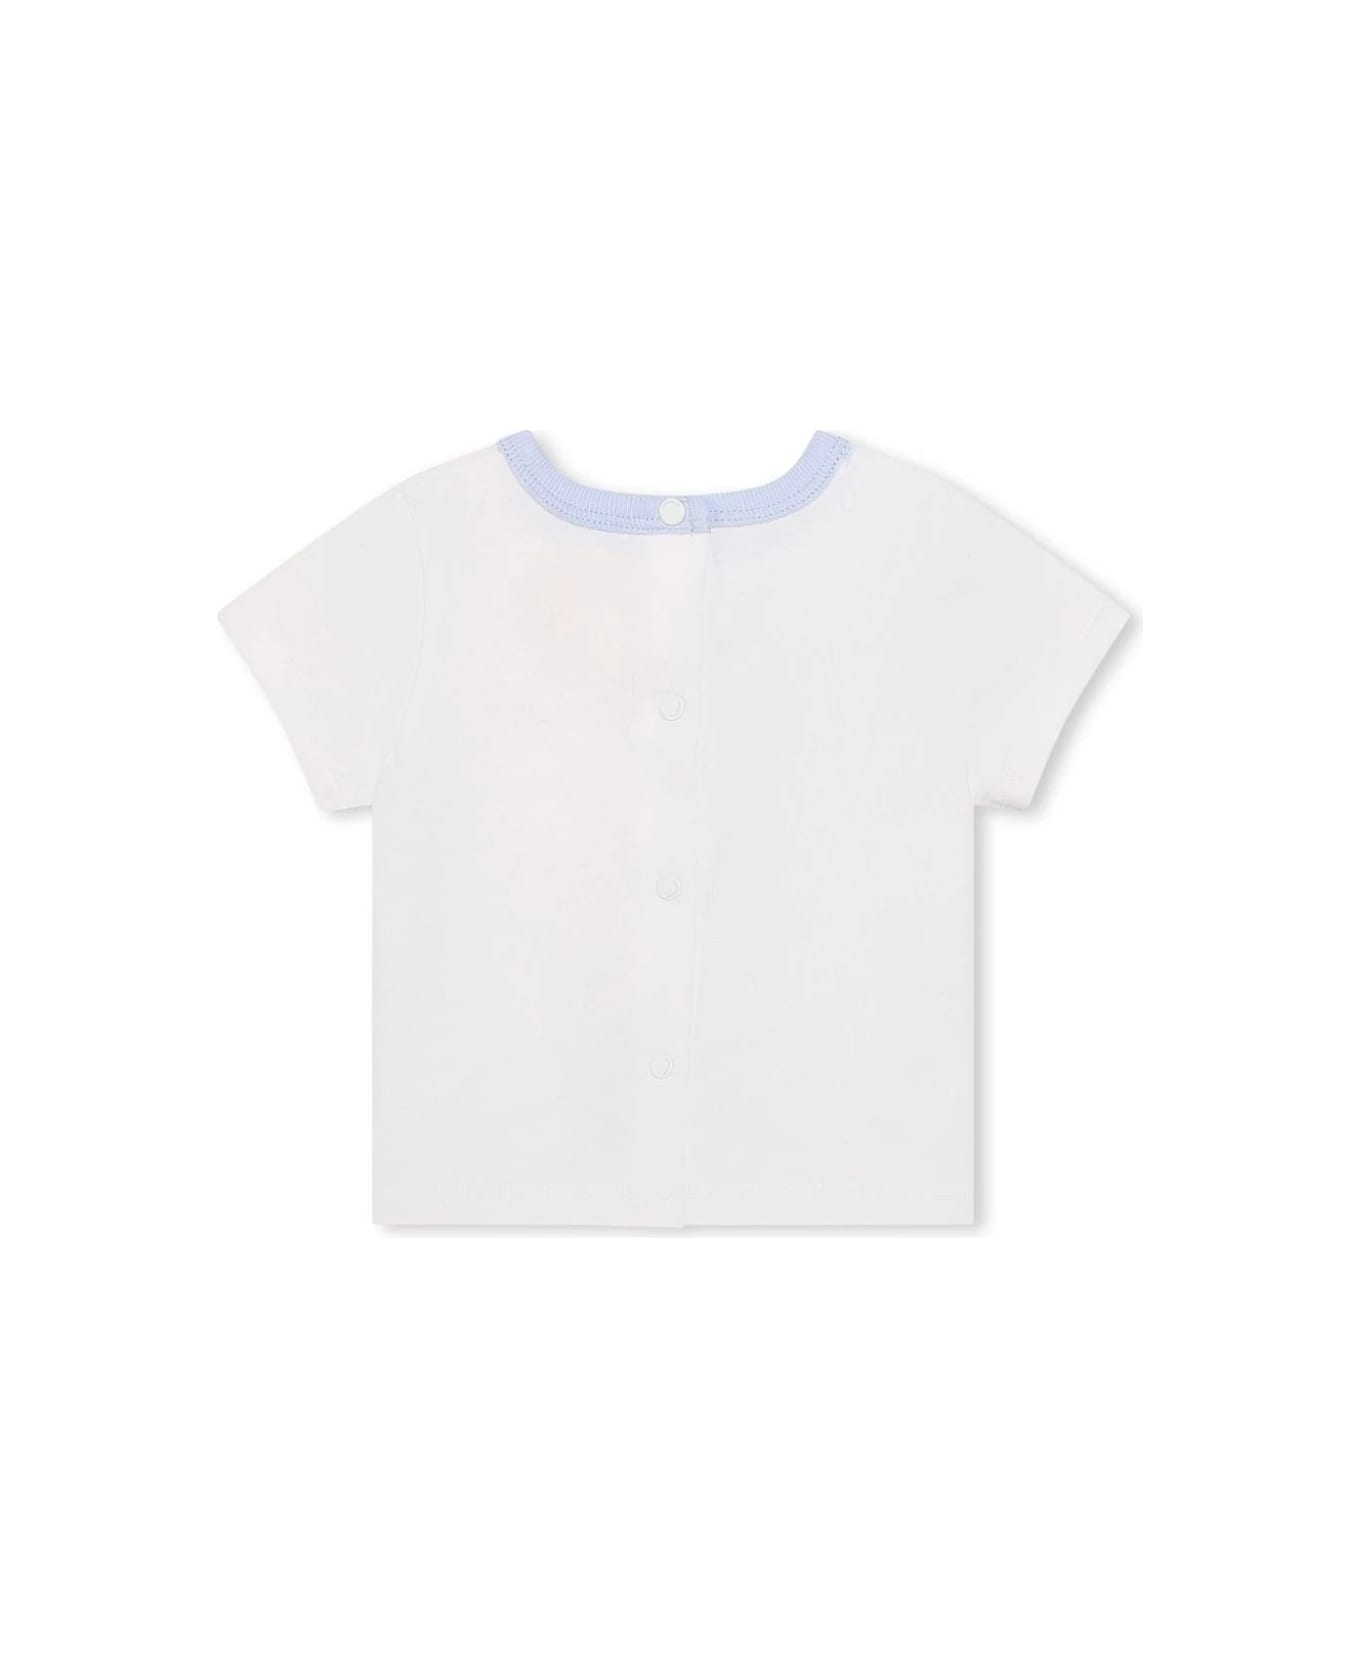 Givenchy 4g T-shirt And Dungaree Set In White And Light Blue - Blue